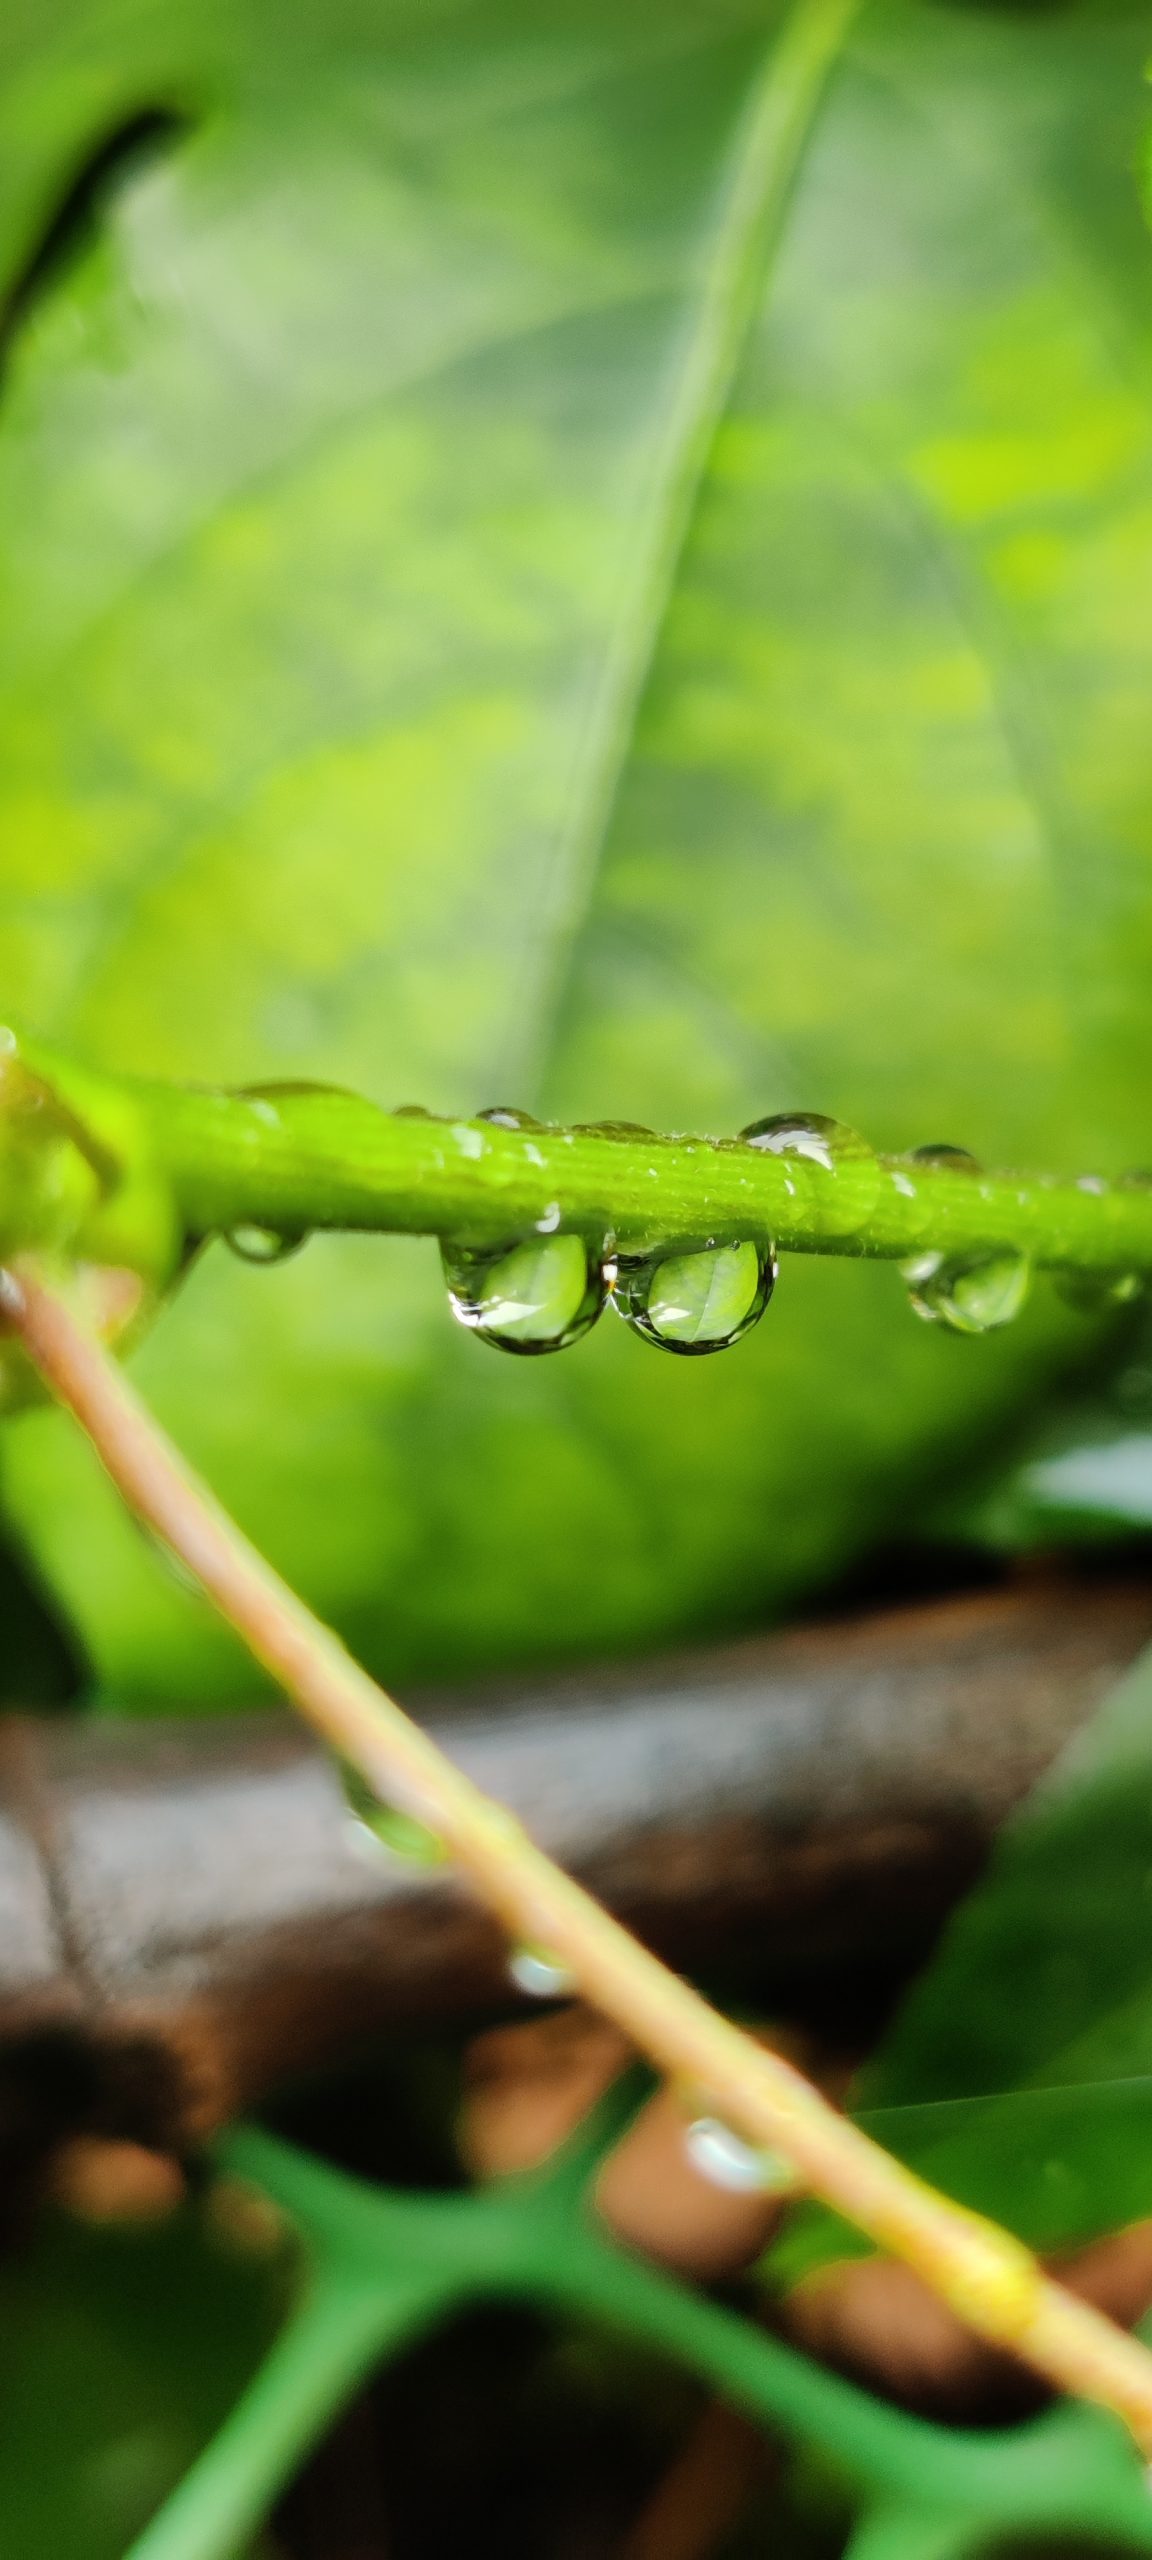 Water droplets on green stem